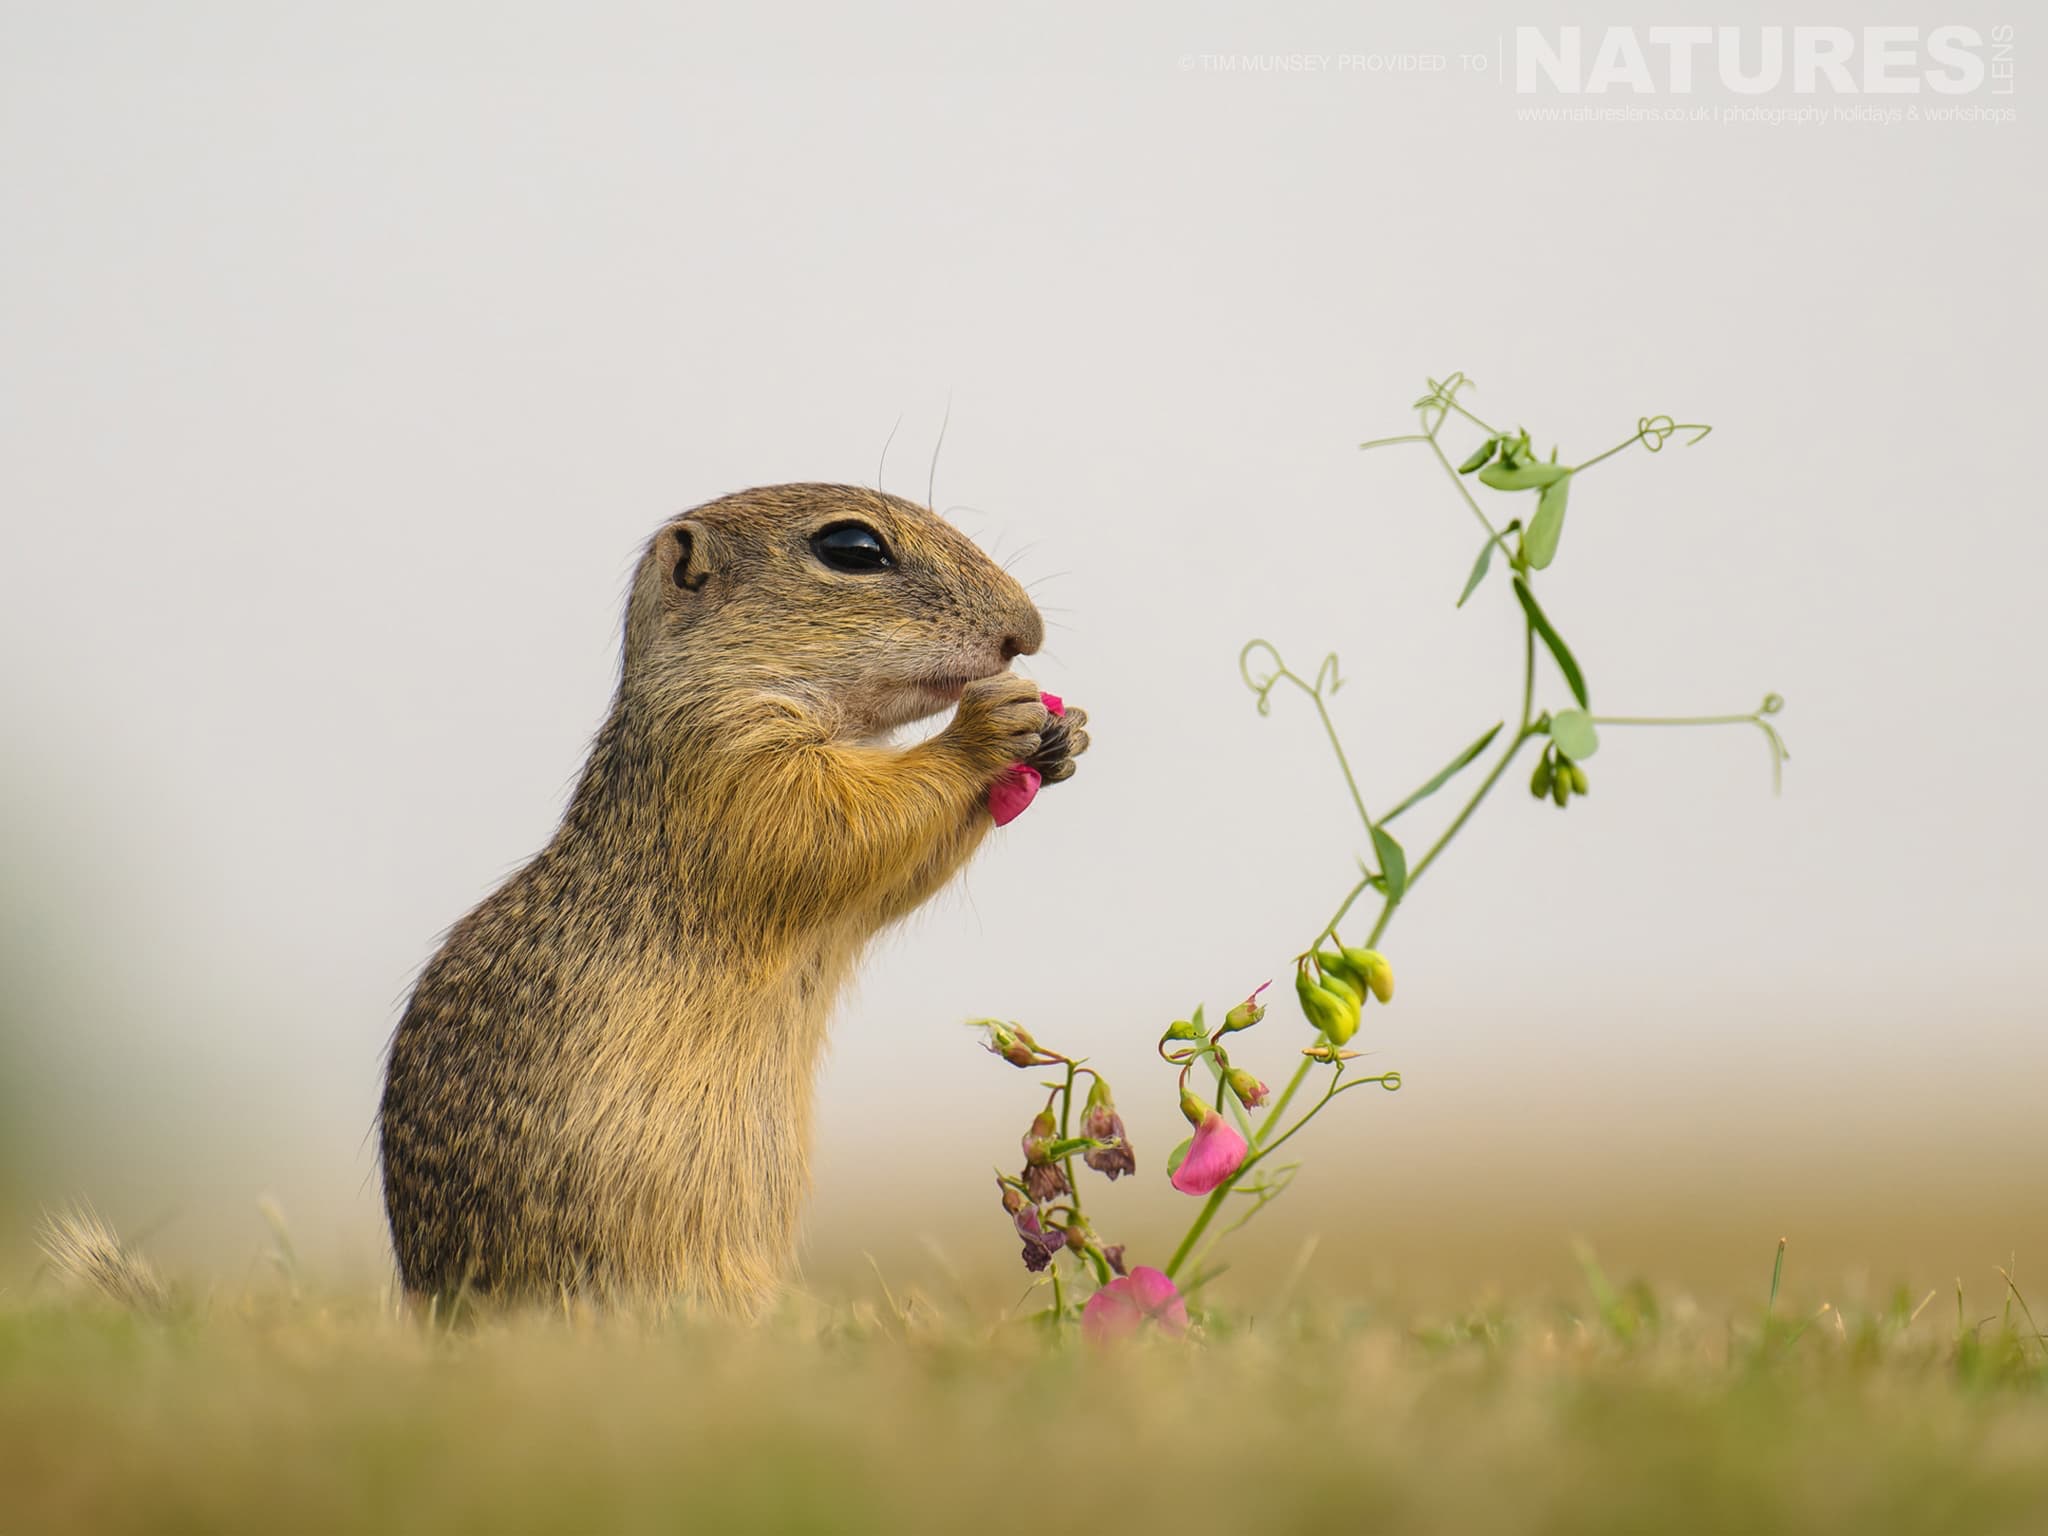 A Ground Squirrel Photographed At Bence Máté's Hides In Hungary During A Natureslens Wildlife Photography Holiday